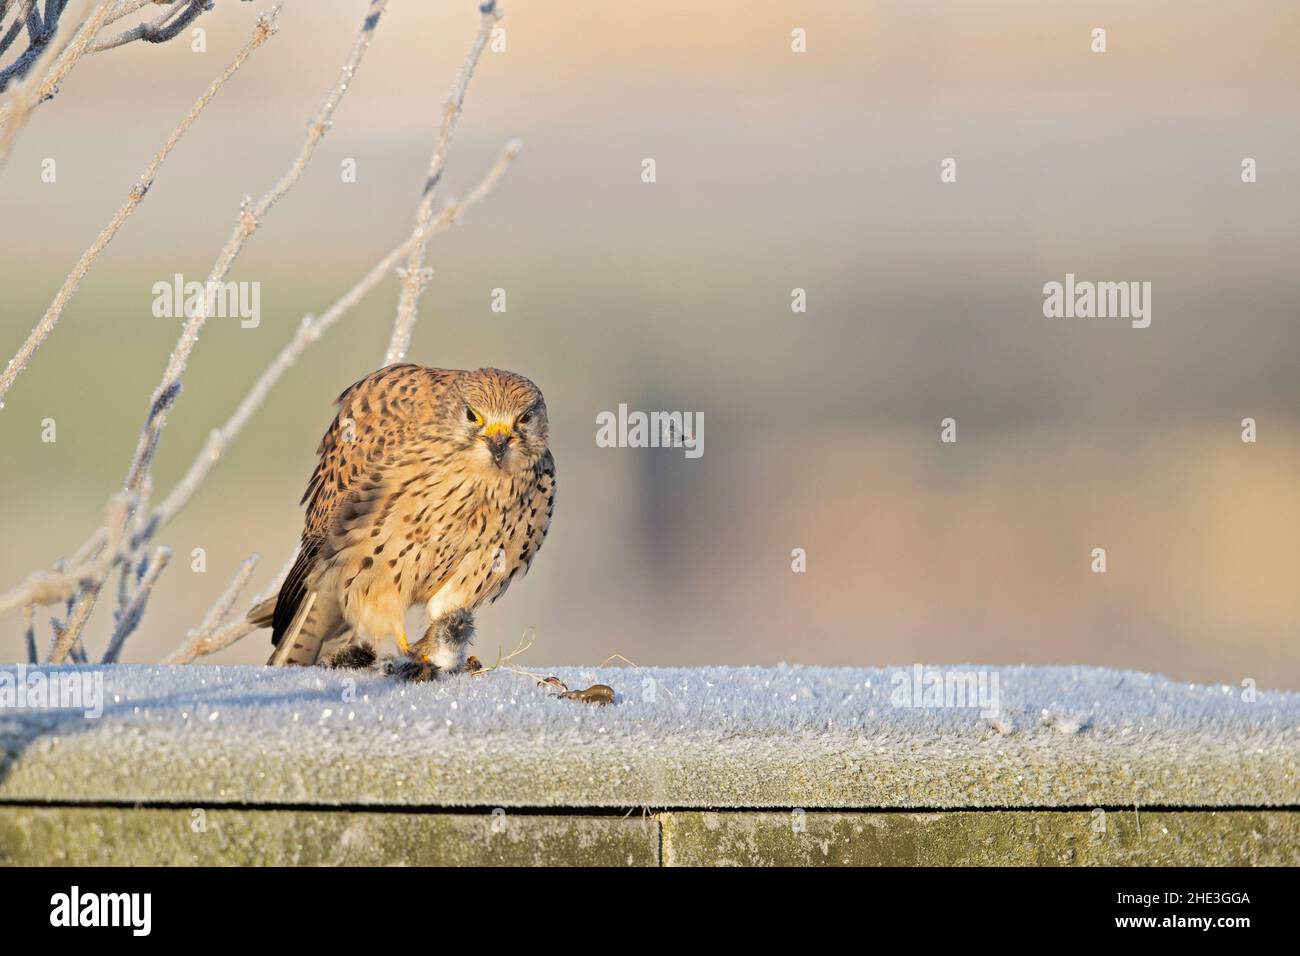 A common kestrel (Falco tinnunculus) eating a mouse. Stock Photo